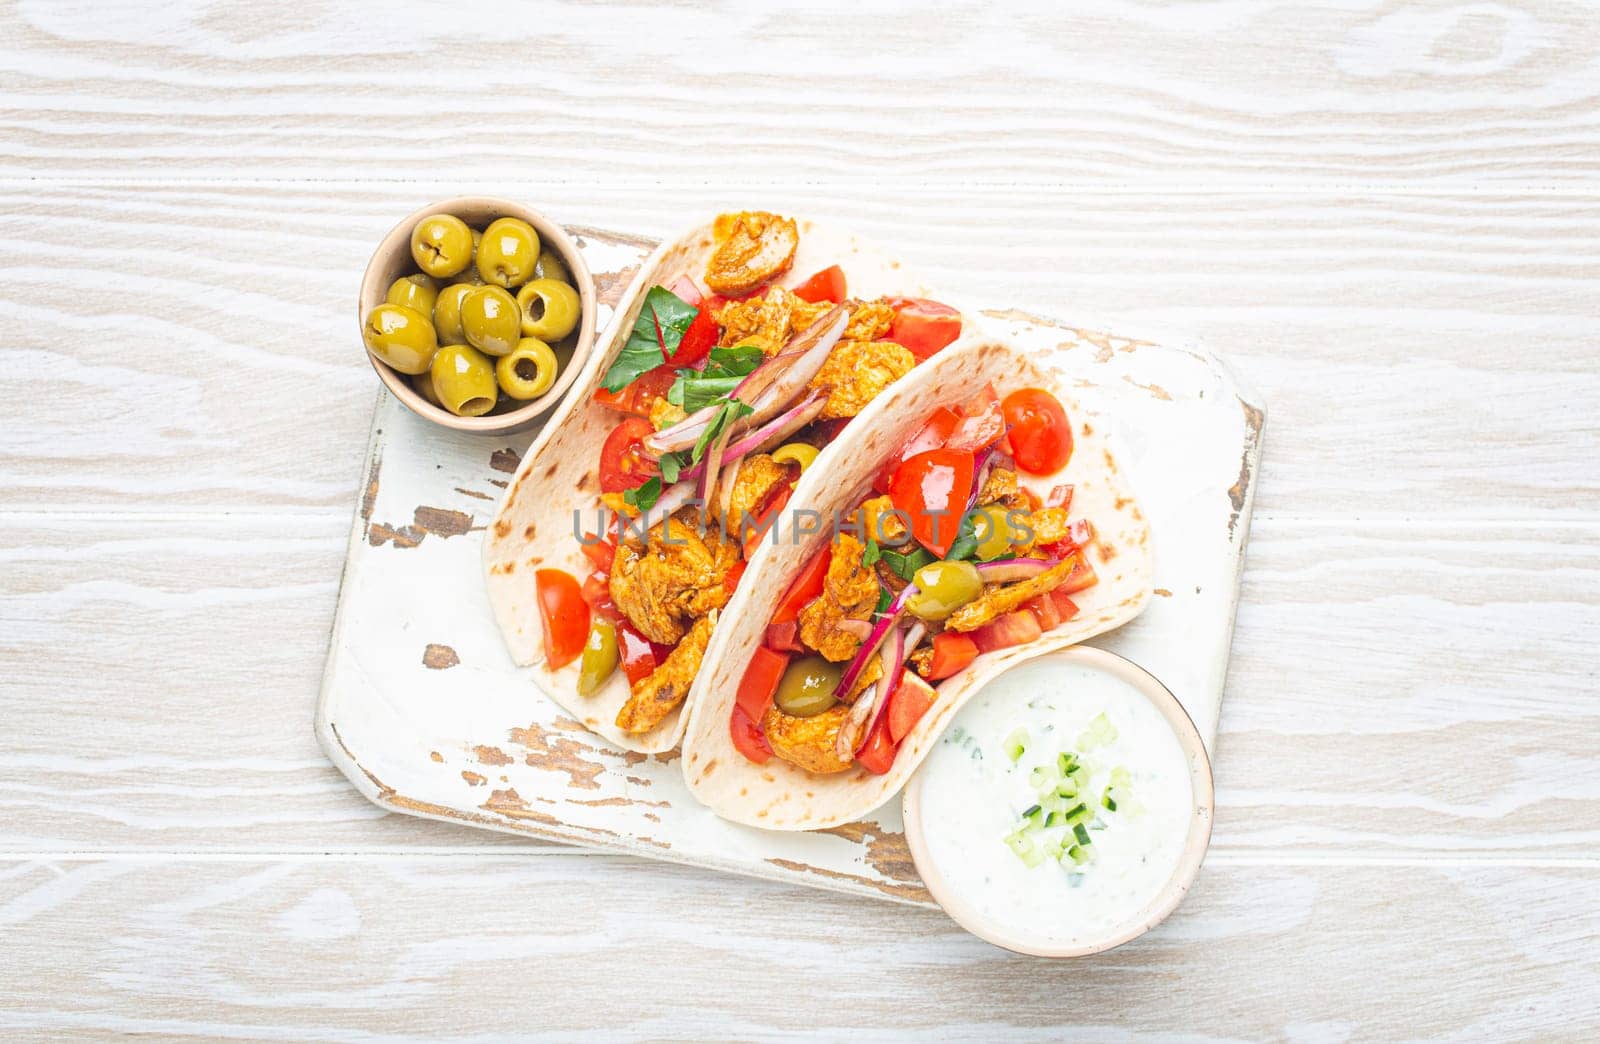 Traditional Greek Dish Gyros: Pita bread Wraps with vegetables, meat, herbs, olives on rustic wooden cutting board with Tzatziki sauce, olive oil top view on white wooden summer background. by its_al_dente